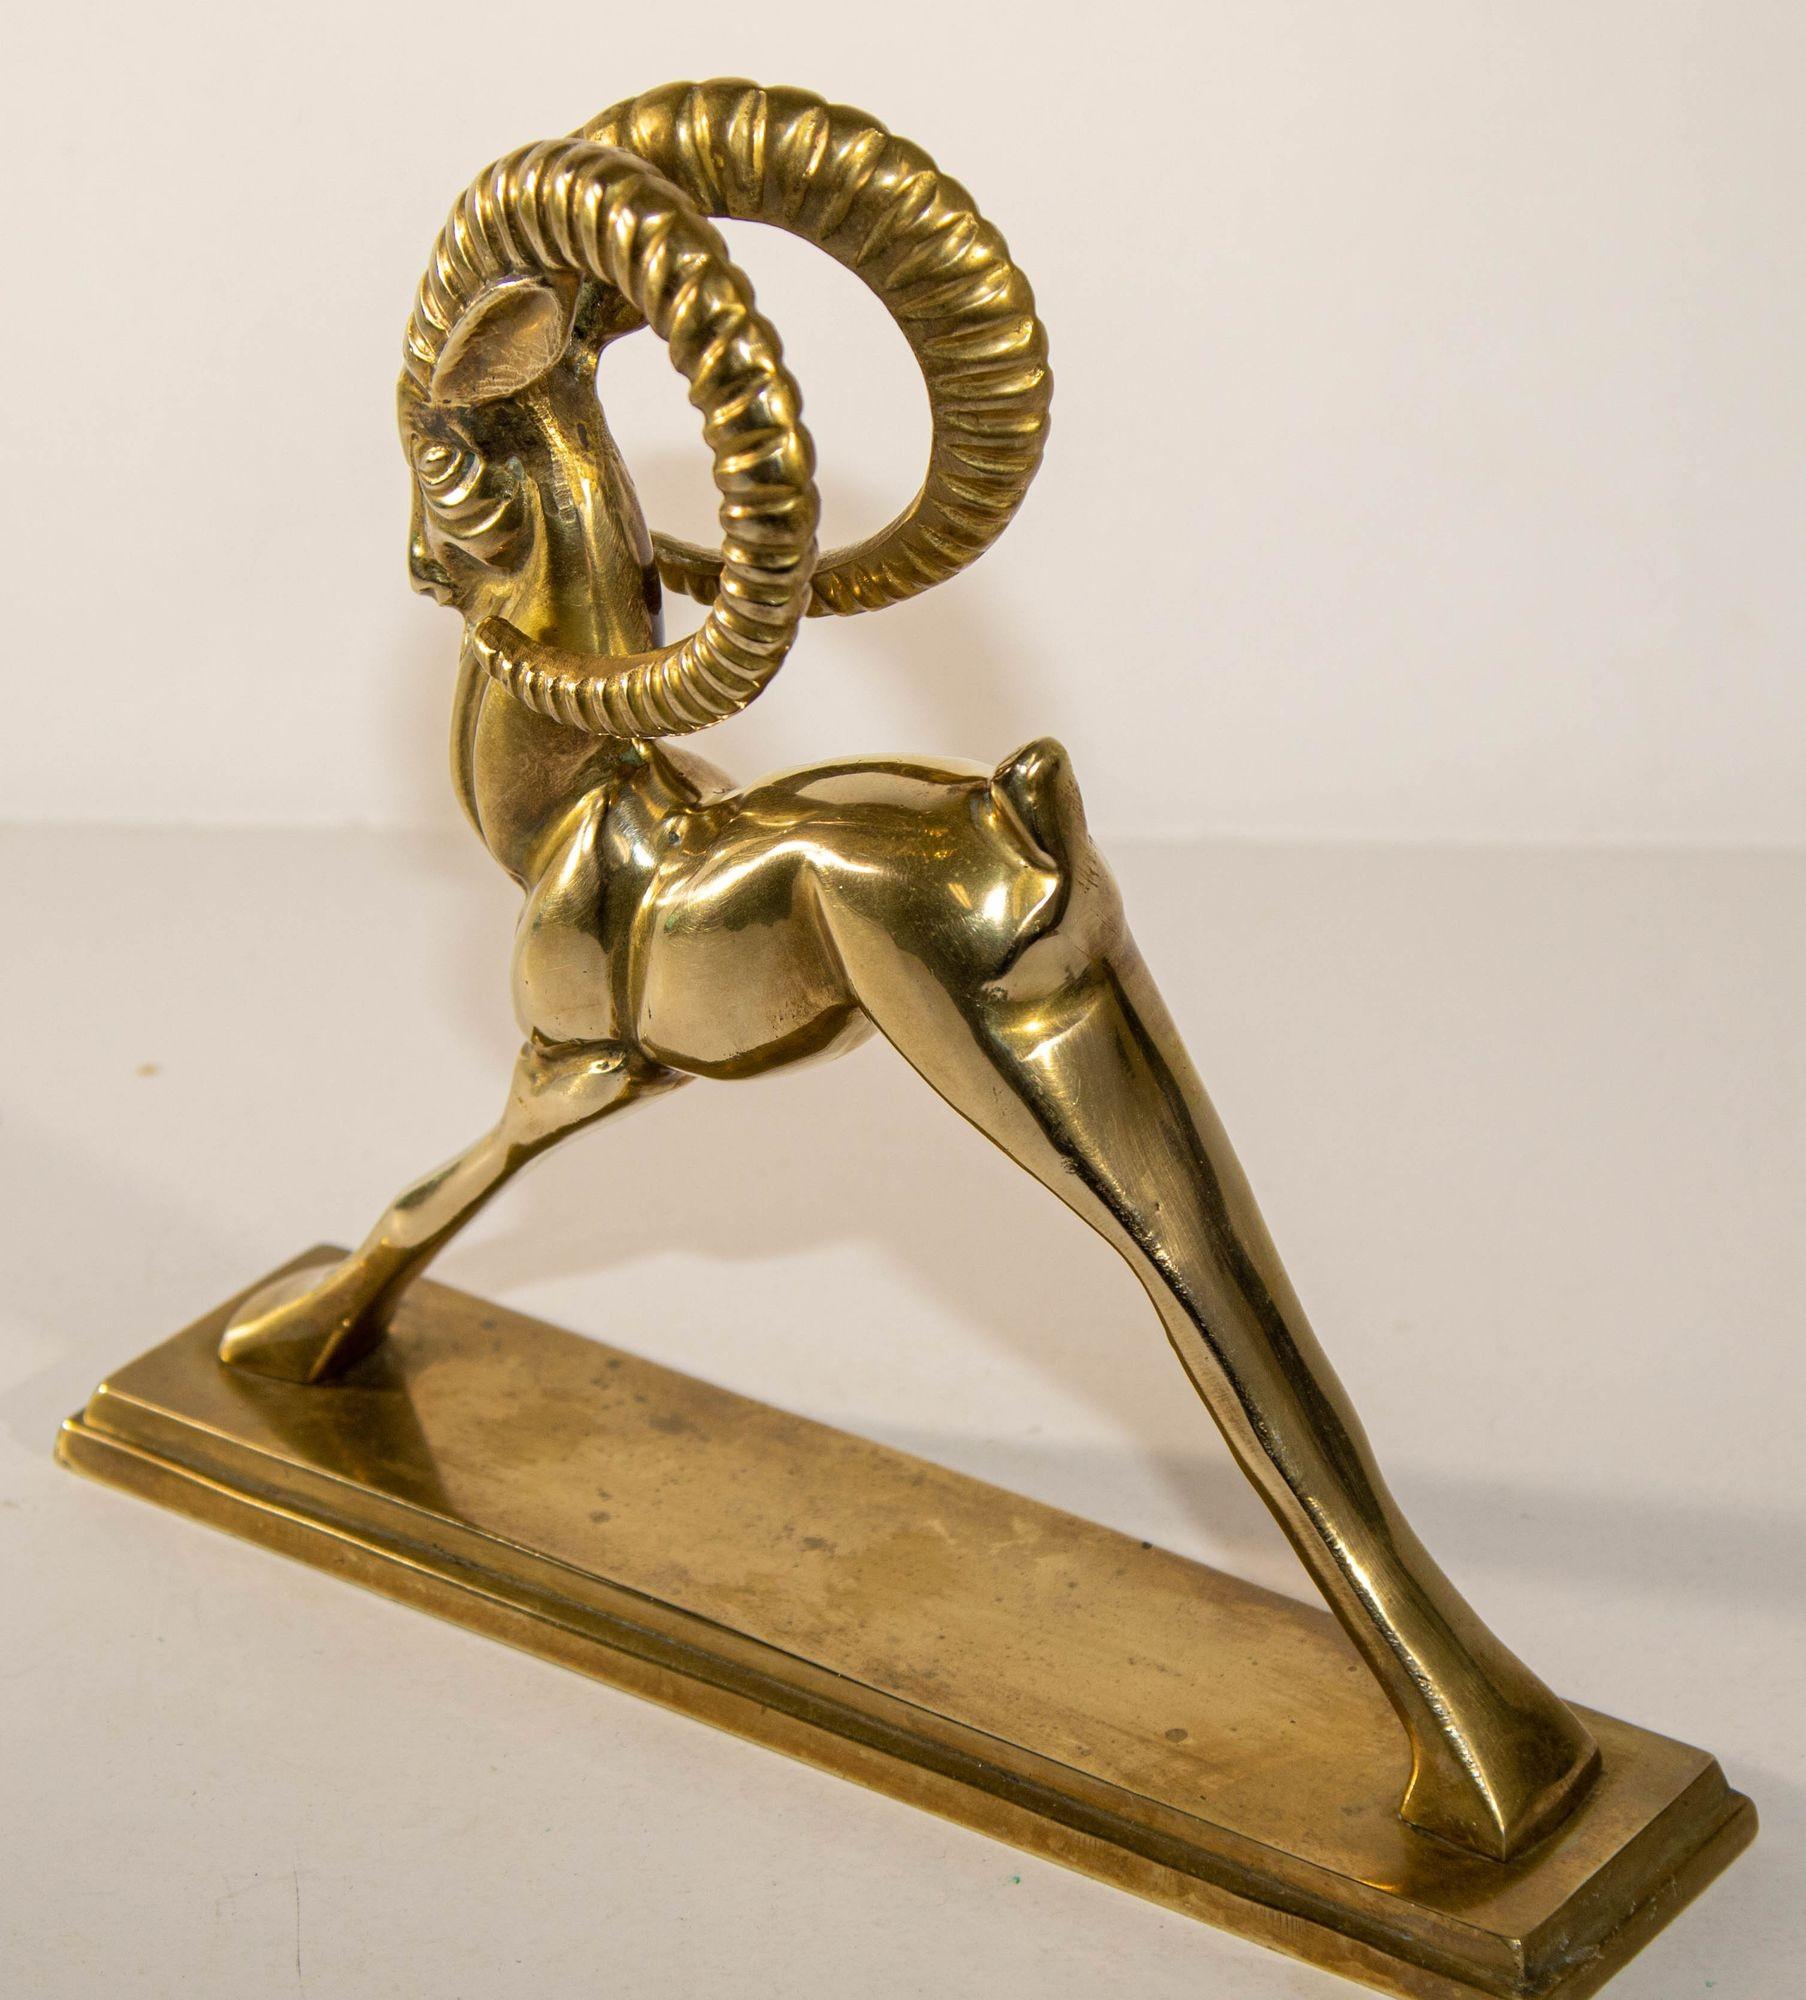 Vintage French Art Deco Style Sculpture of Brass Ibex Antelope For Sale 4